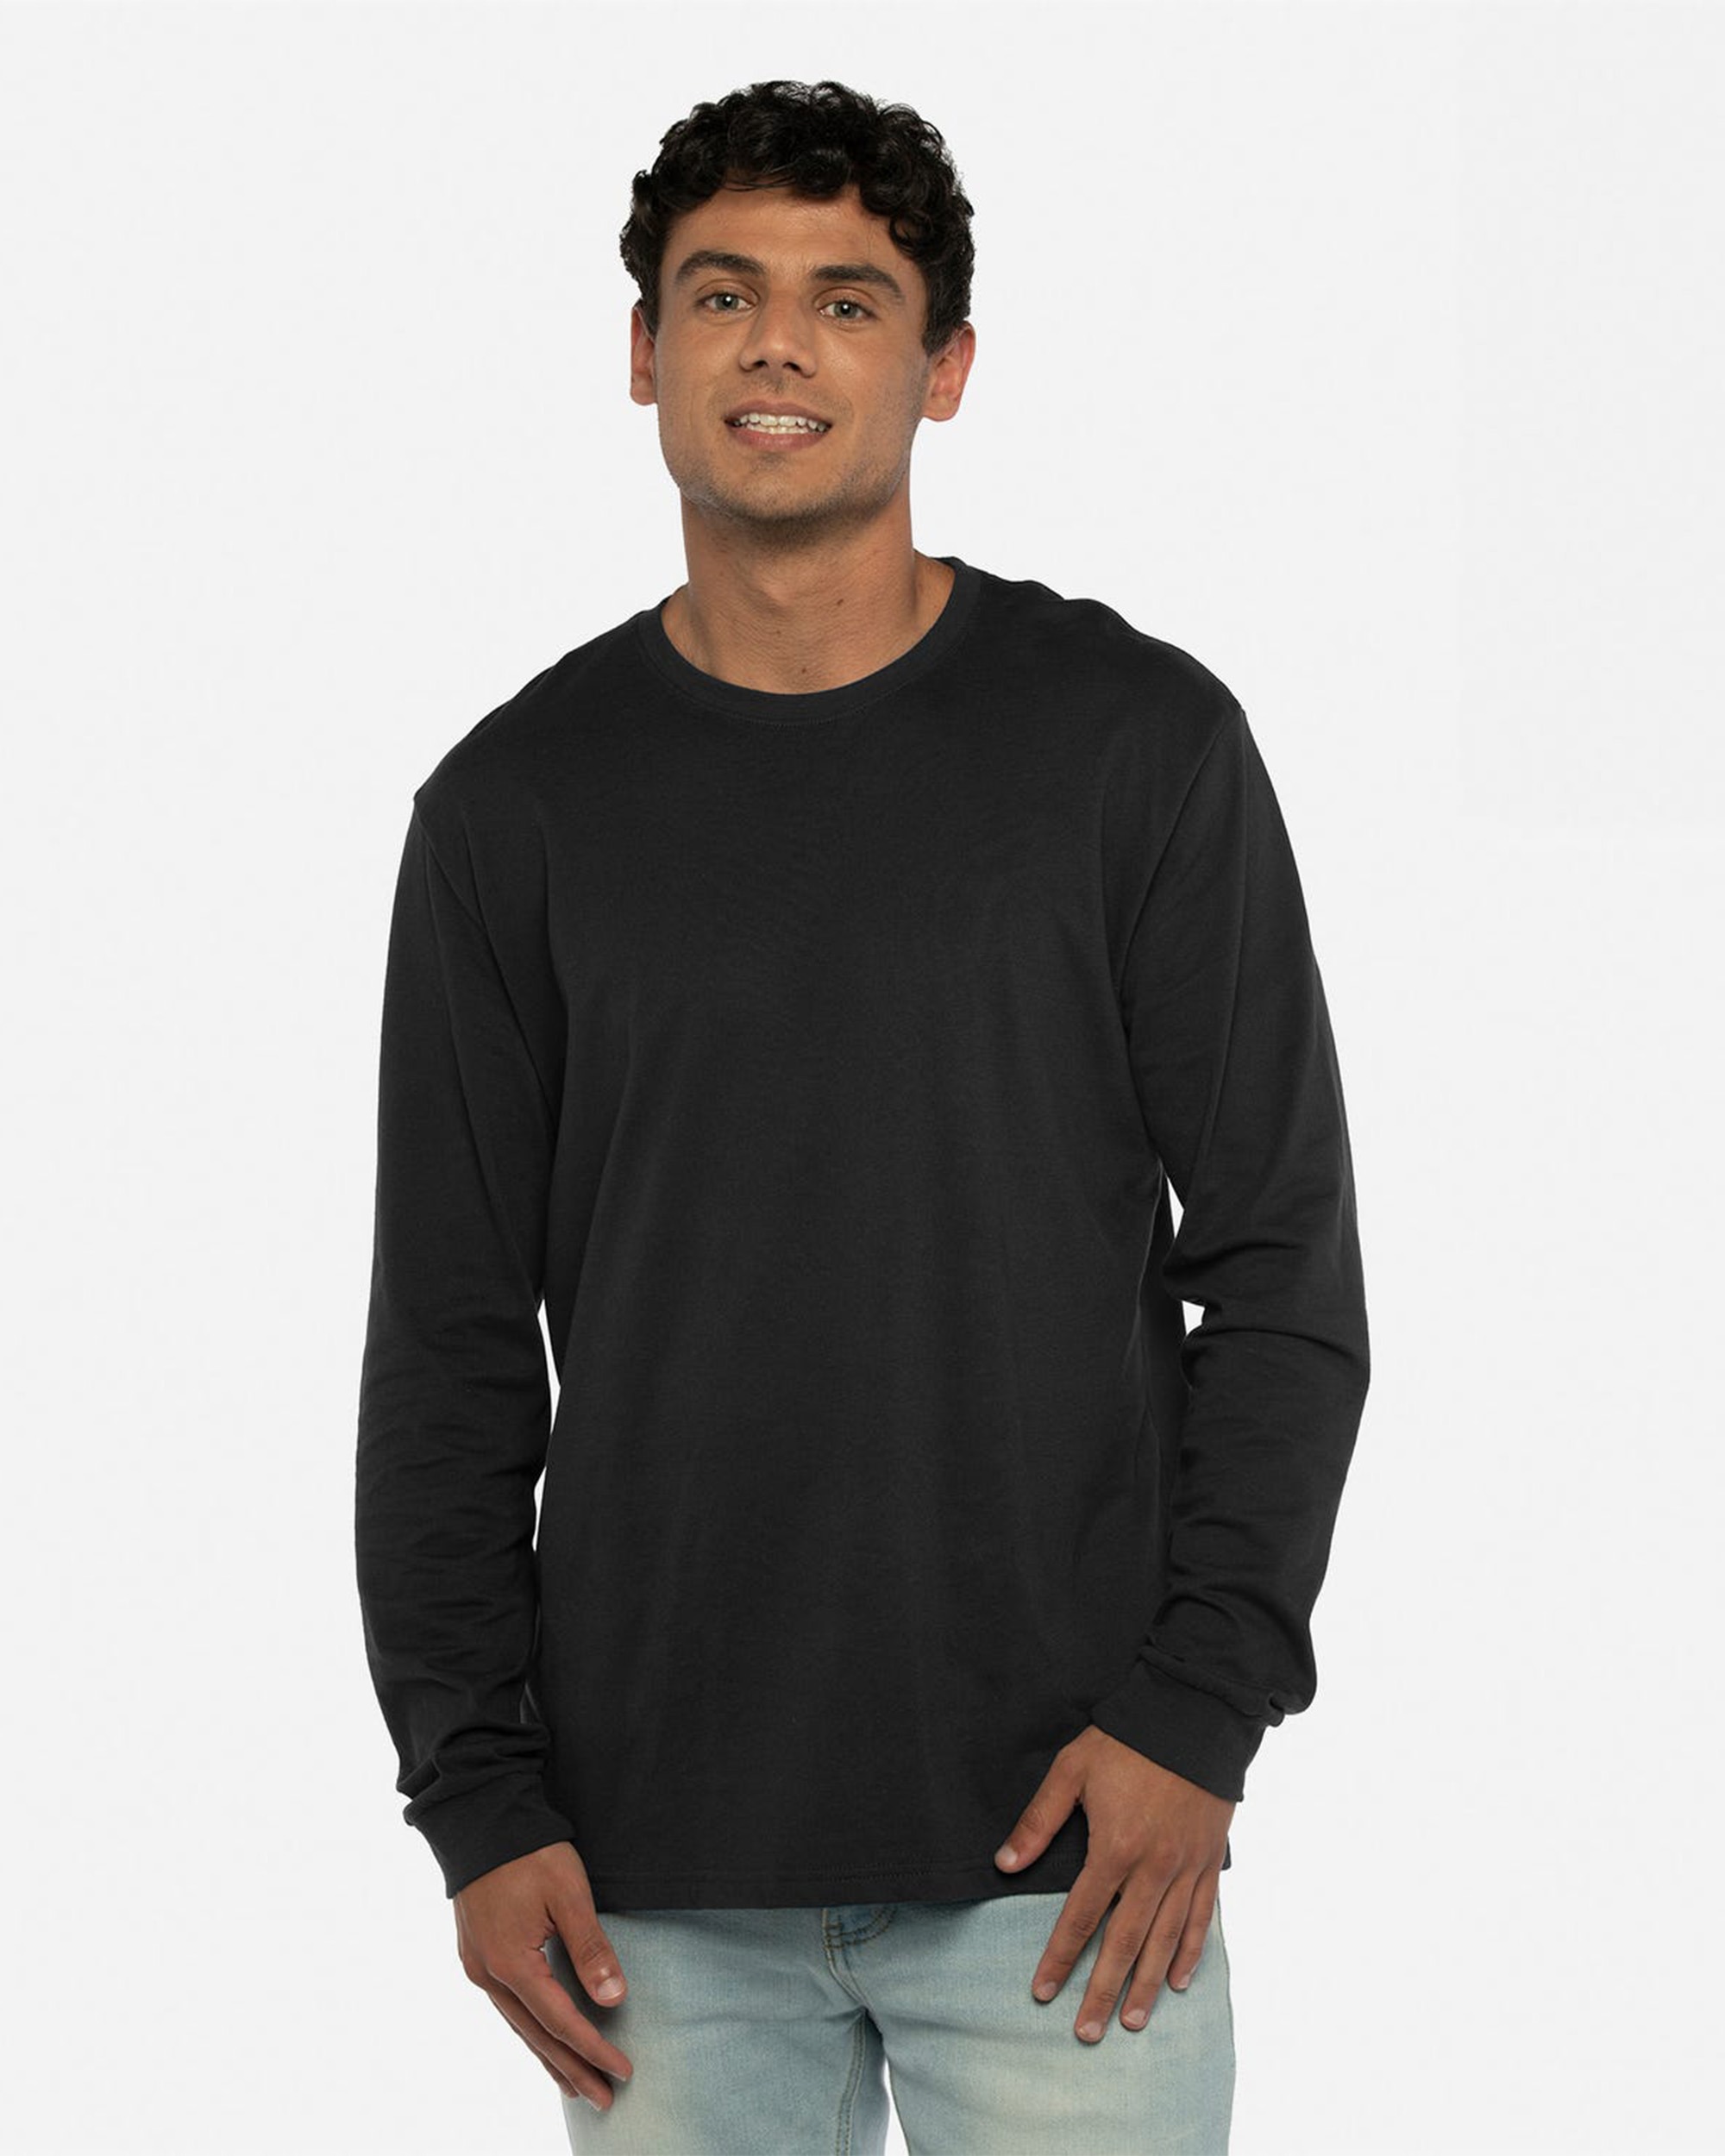 Next Level Apparel® 6411 Unisex Sueded Long Sleeve T-Shirt